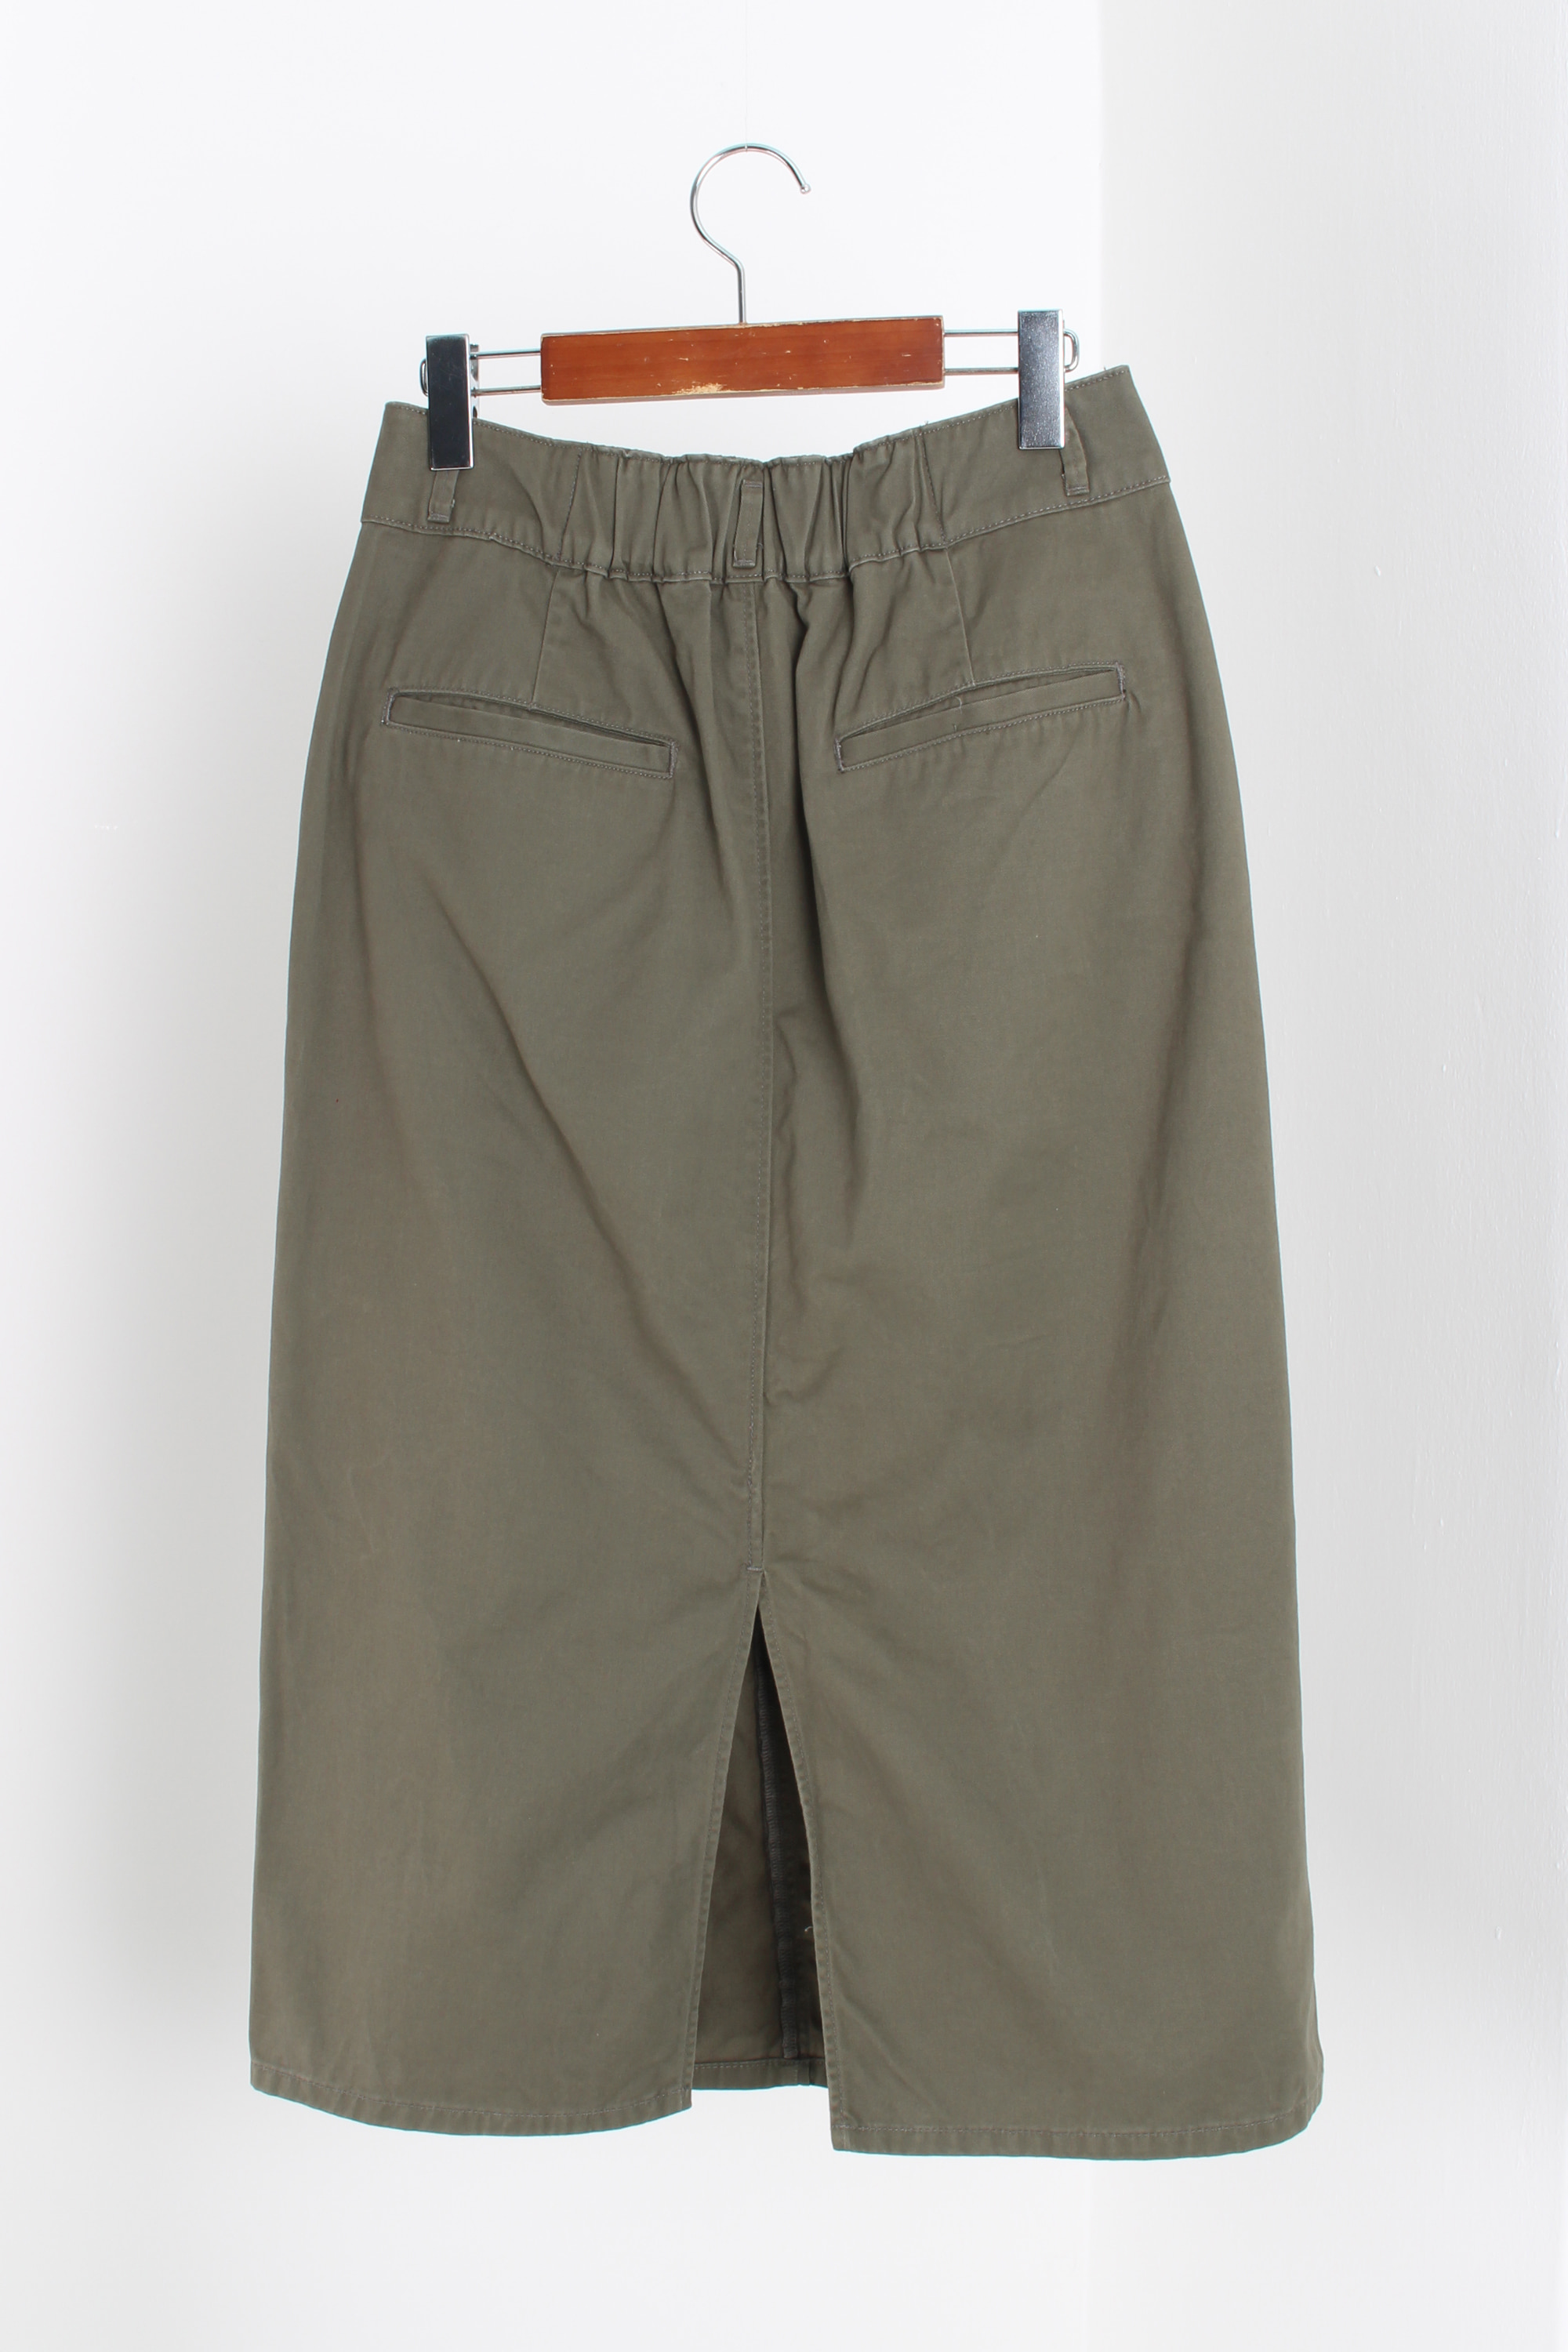 earth music &amp; ecology Cotton Skirts(M)